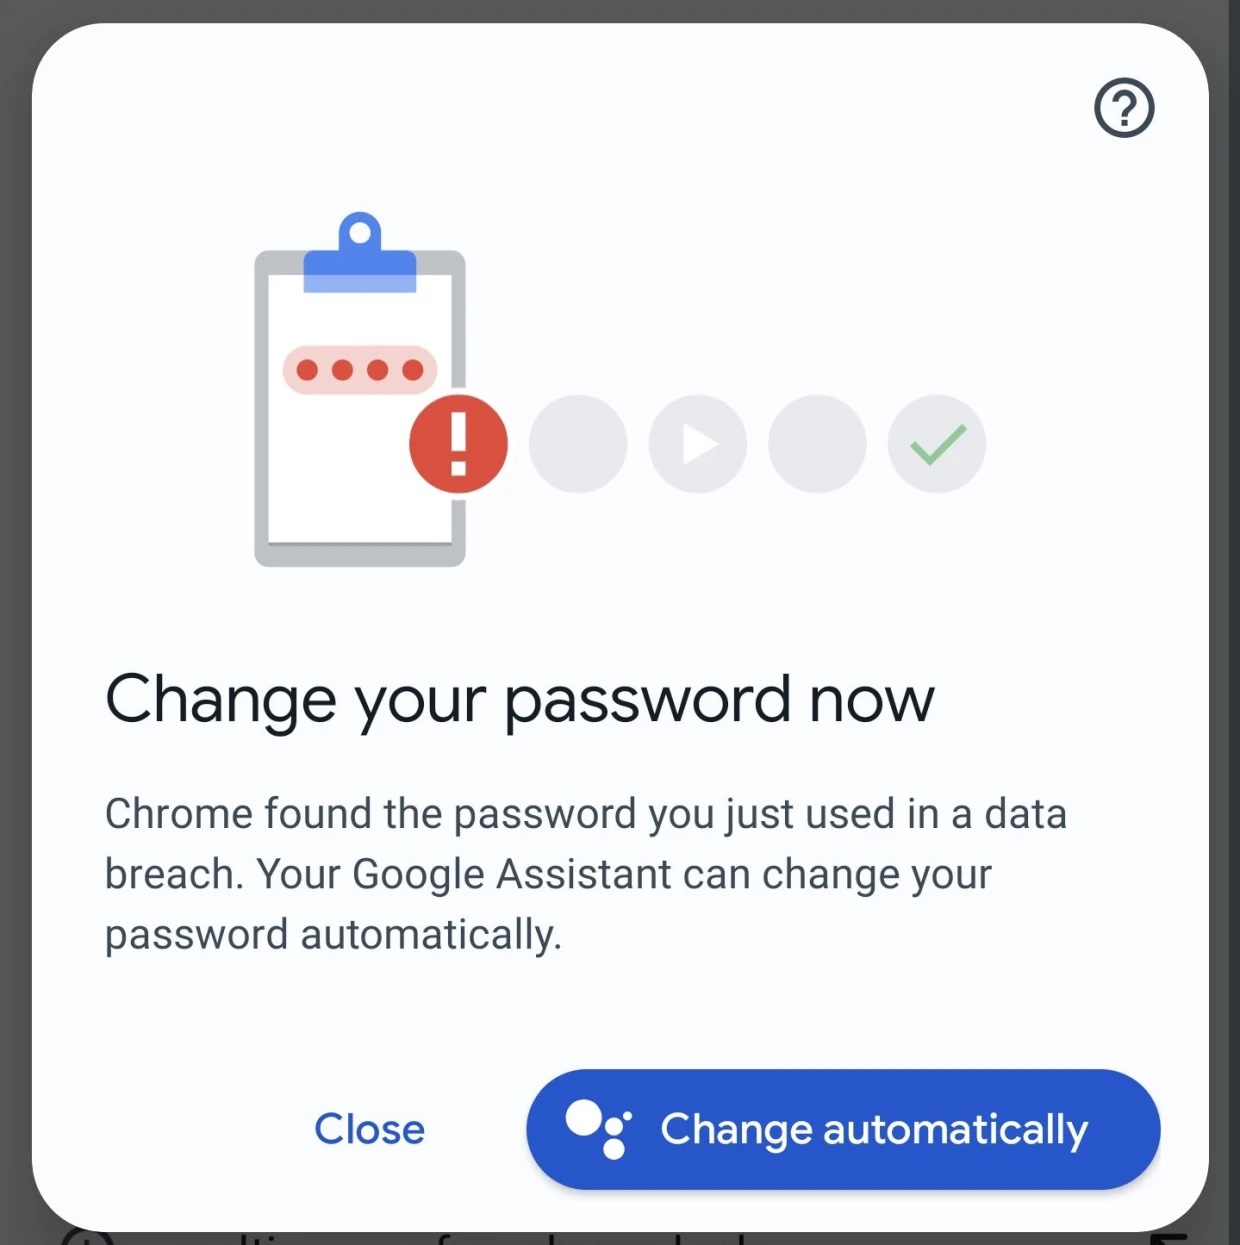 Google delivers an urgent security warning to millions of people due to stolen credentials - Check your phone right now